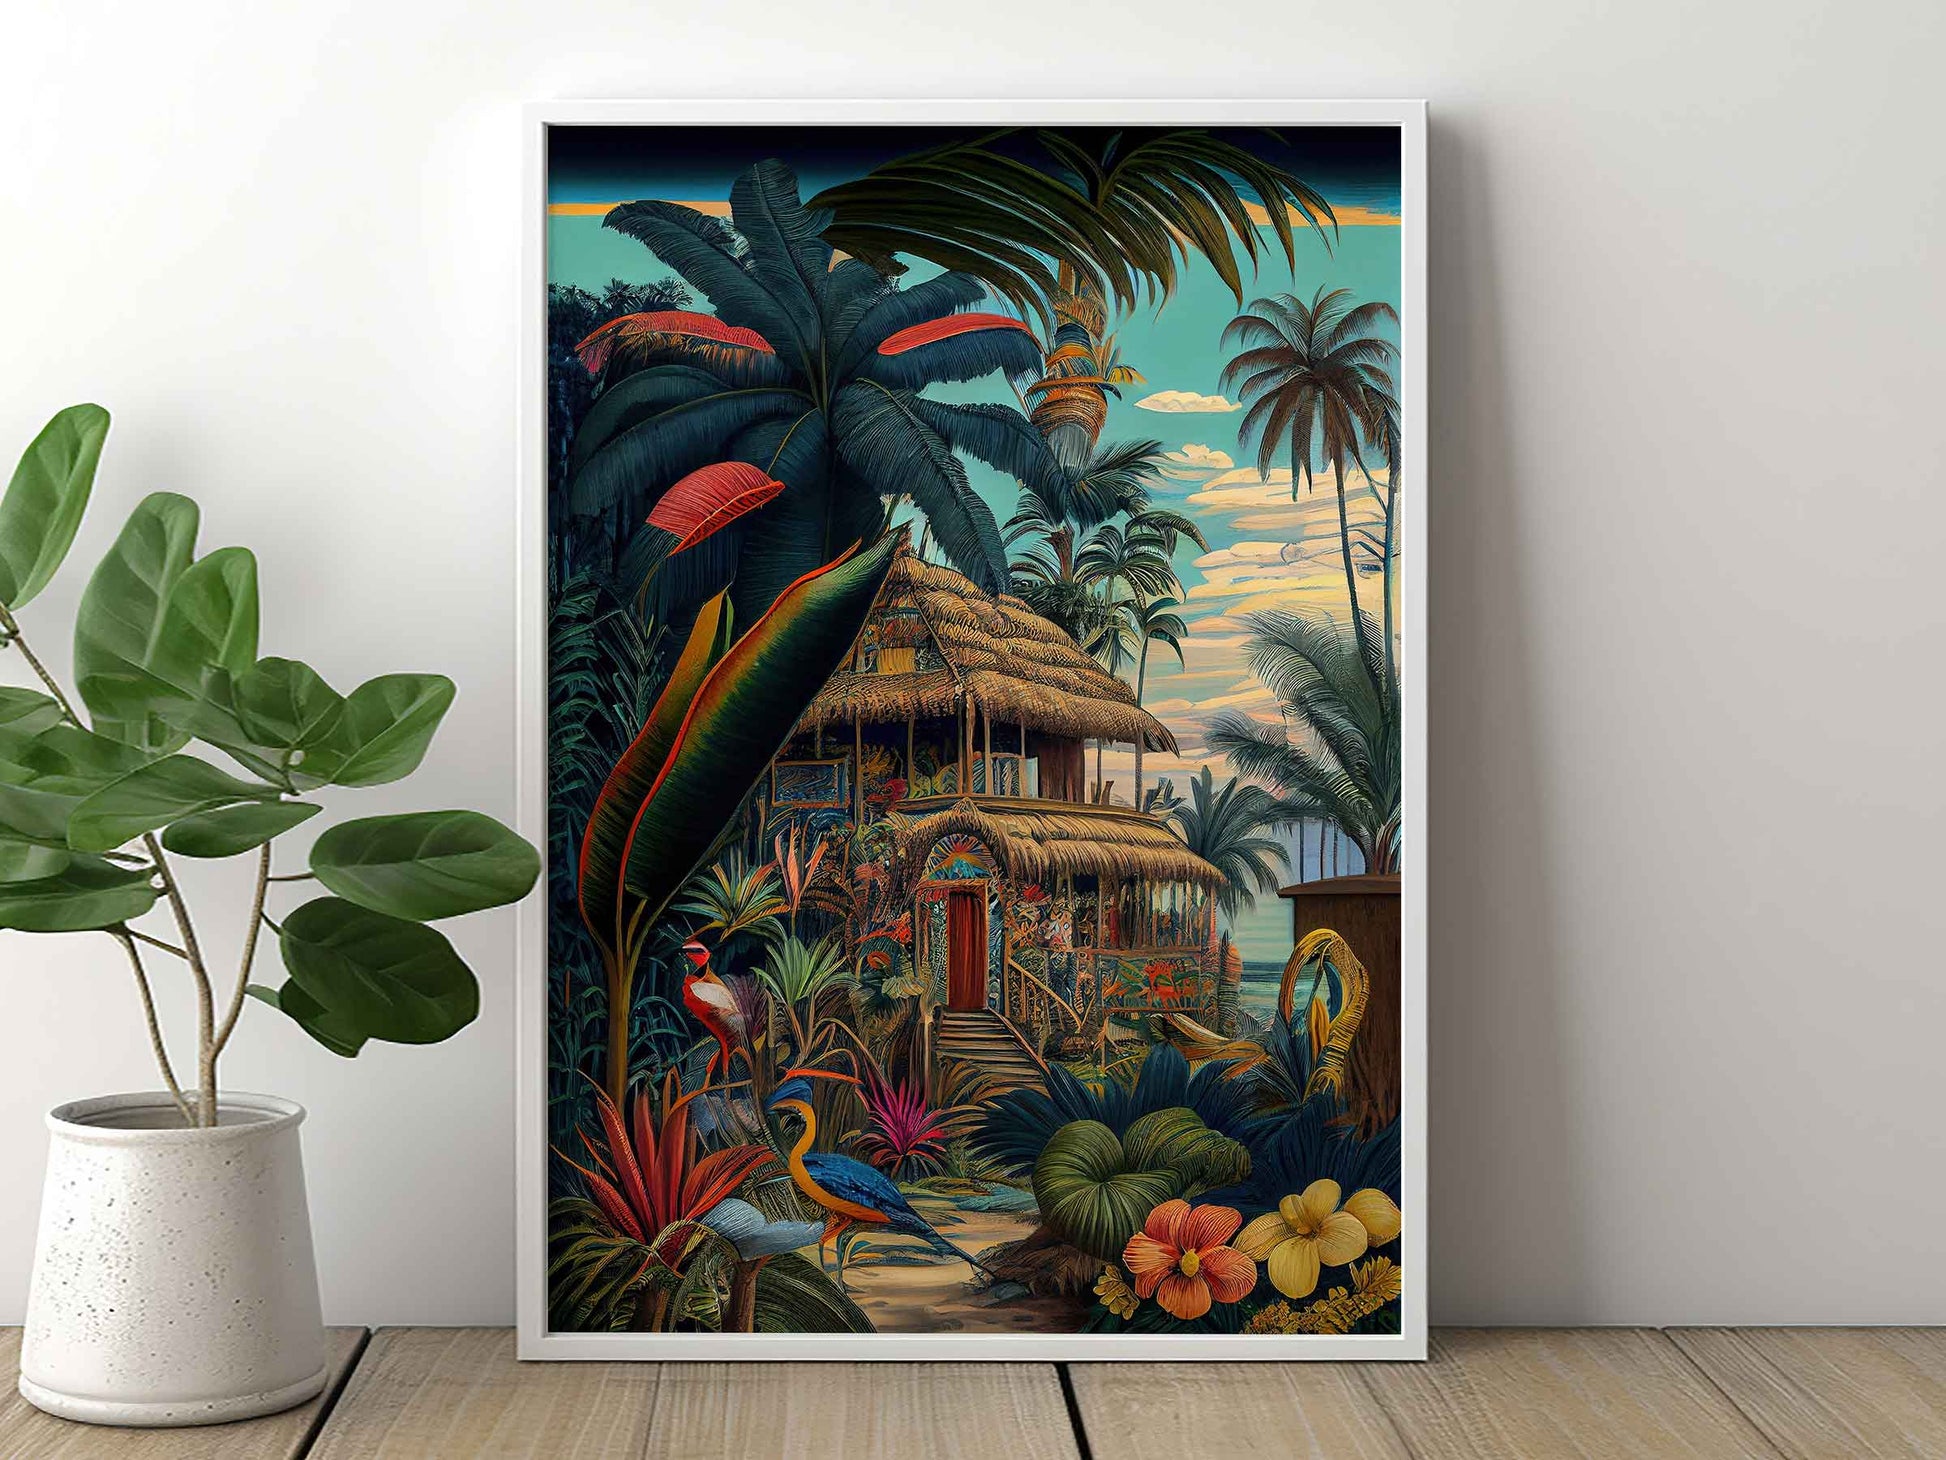 Framed Image of Jungle Botanical Wall Art, Maximalist Style Oil Painting Prints